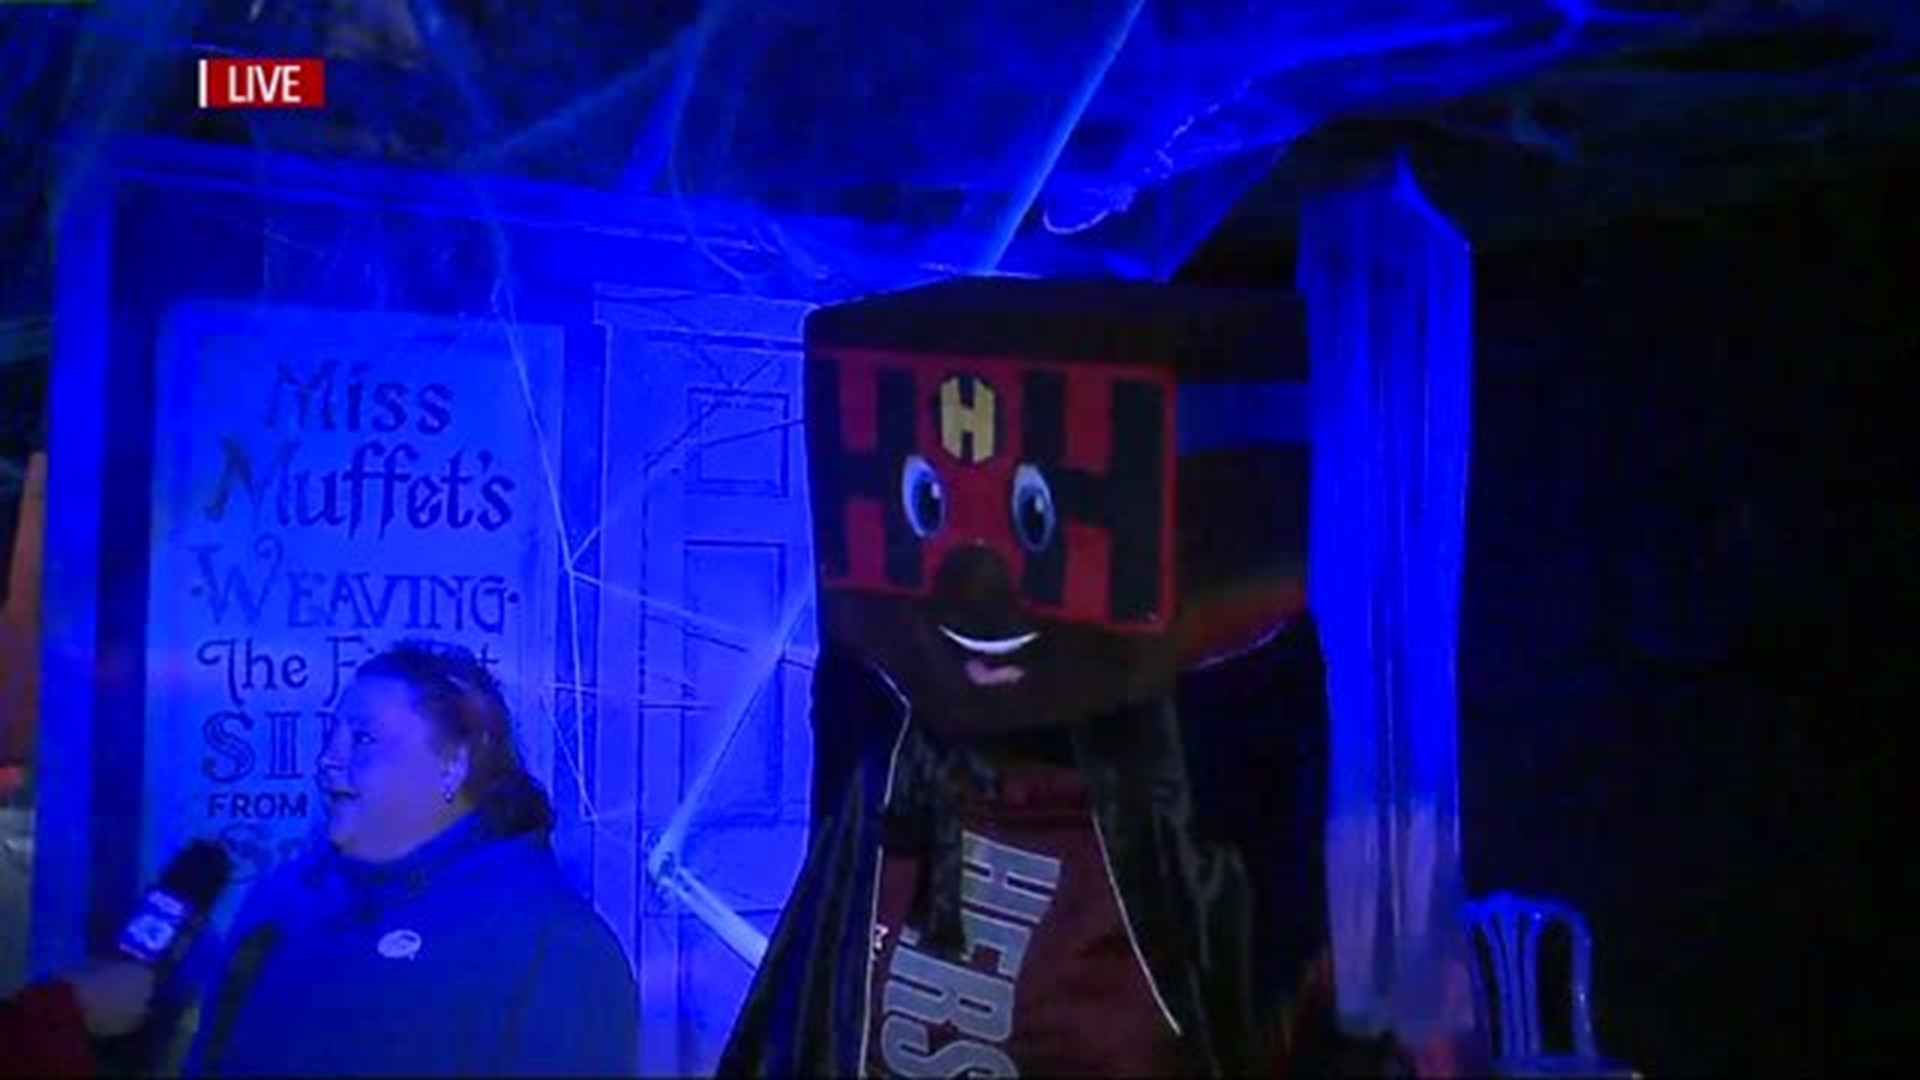 Checking out the spooky rides and sweet treats at Hersheypark in the Dark in Dauphin County